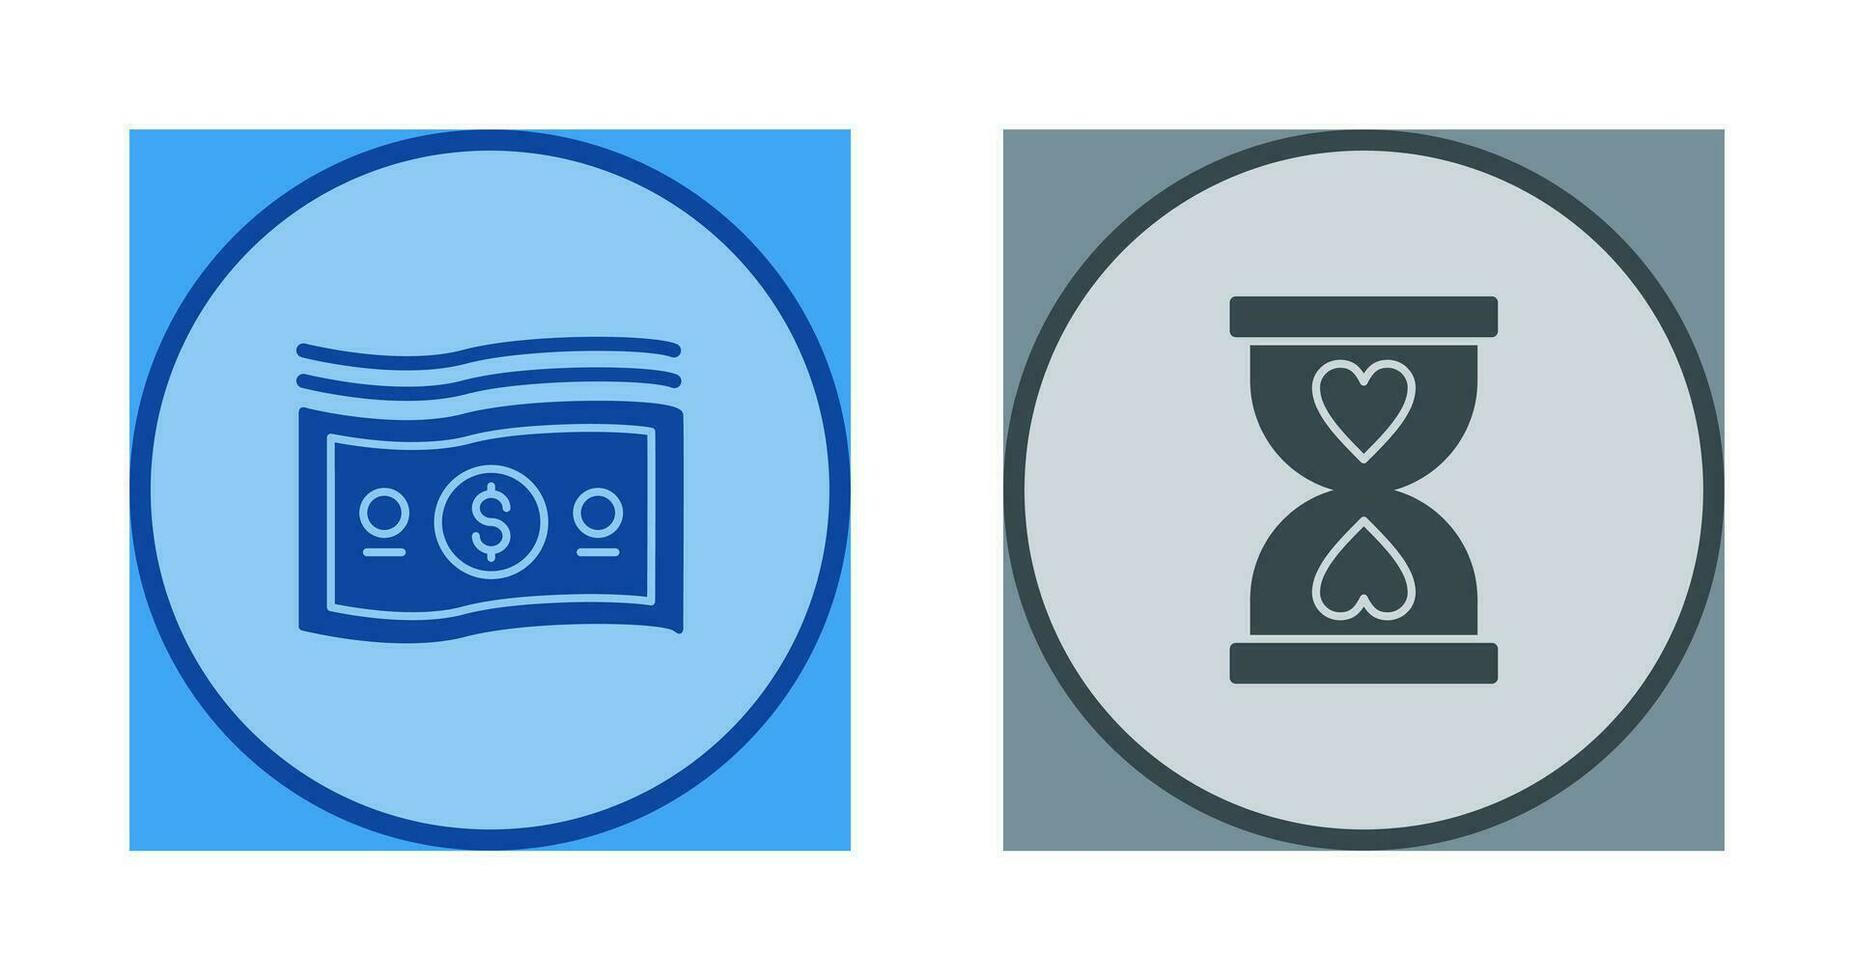 Dollar and Hourglass Icon vector